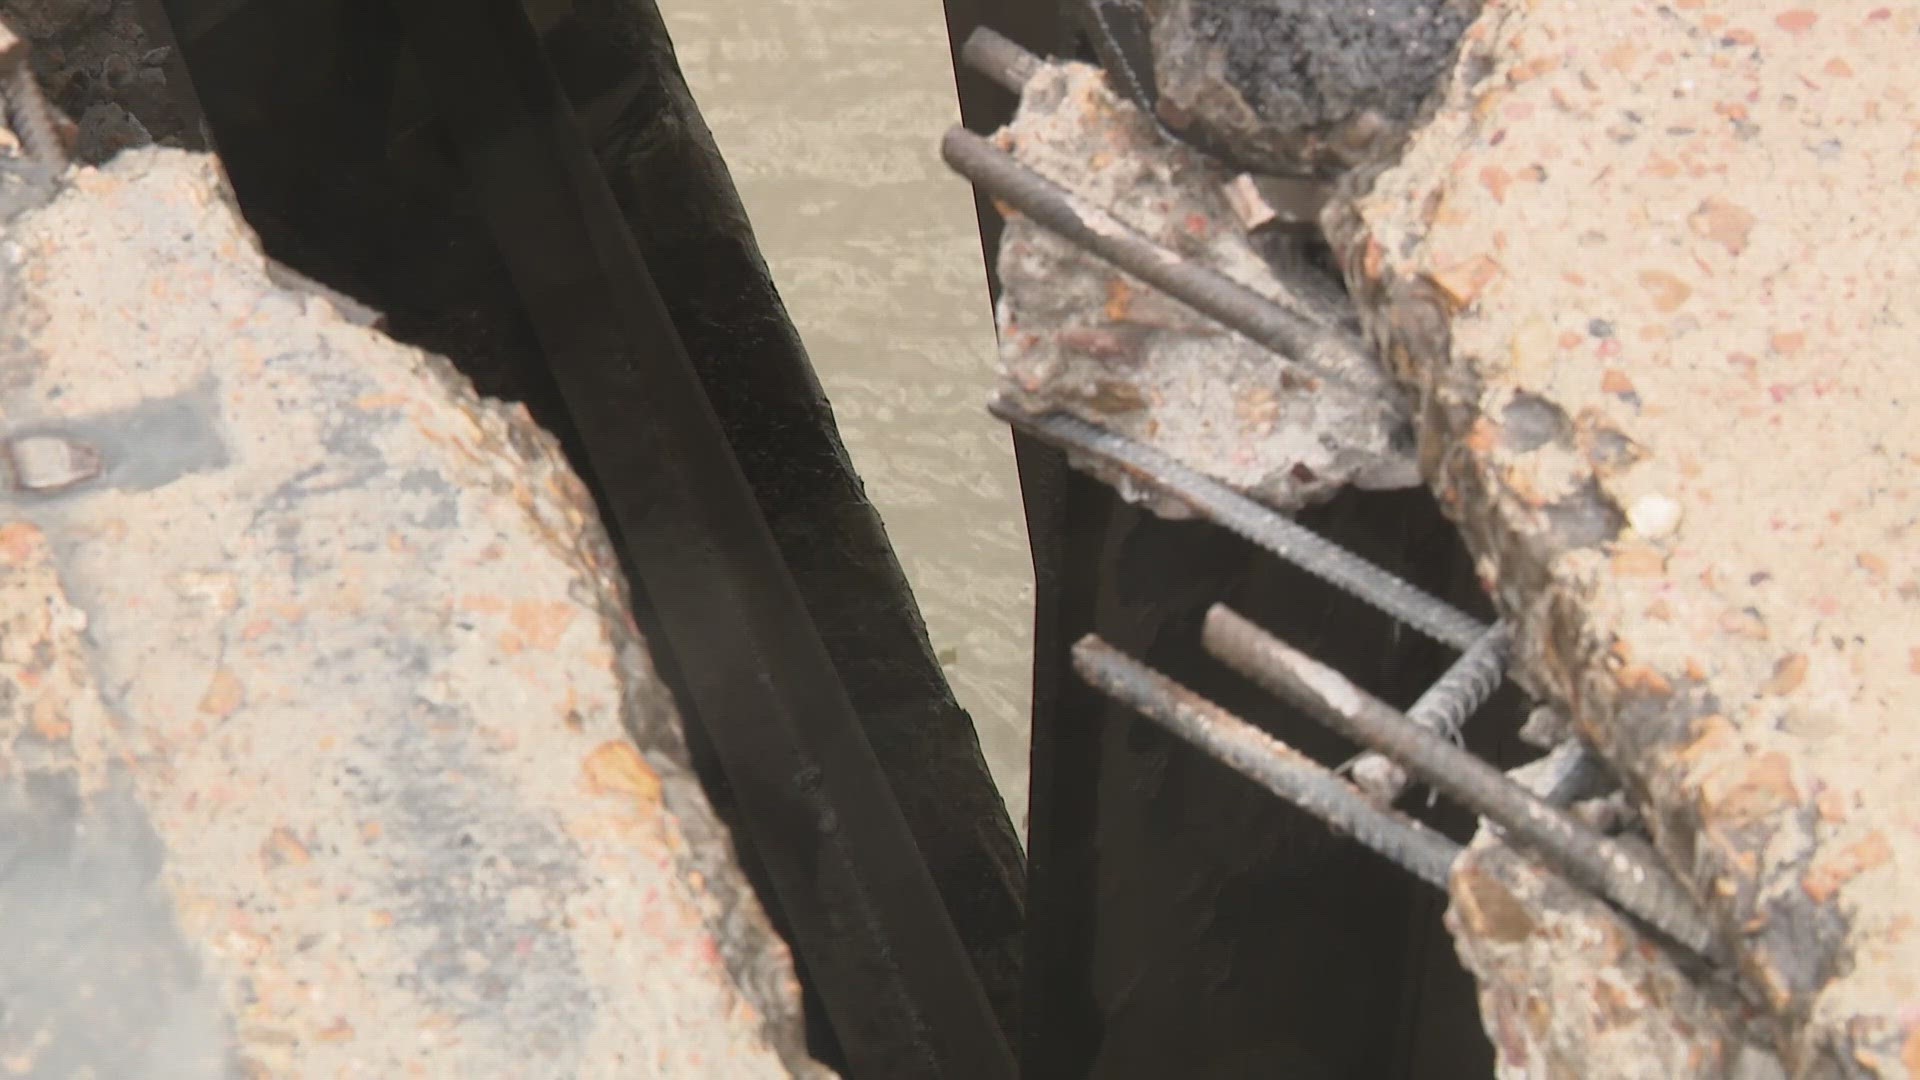 TxDOT said they put a temporary fix in place since the materials needed for a permanent fix are on backorder.